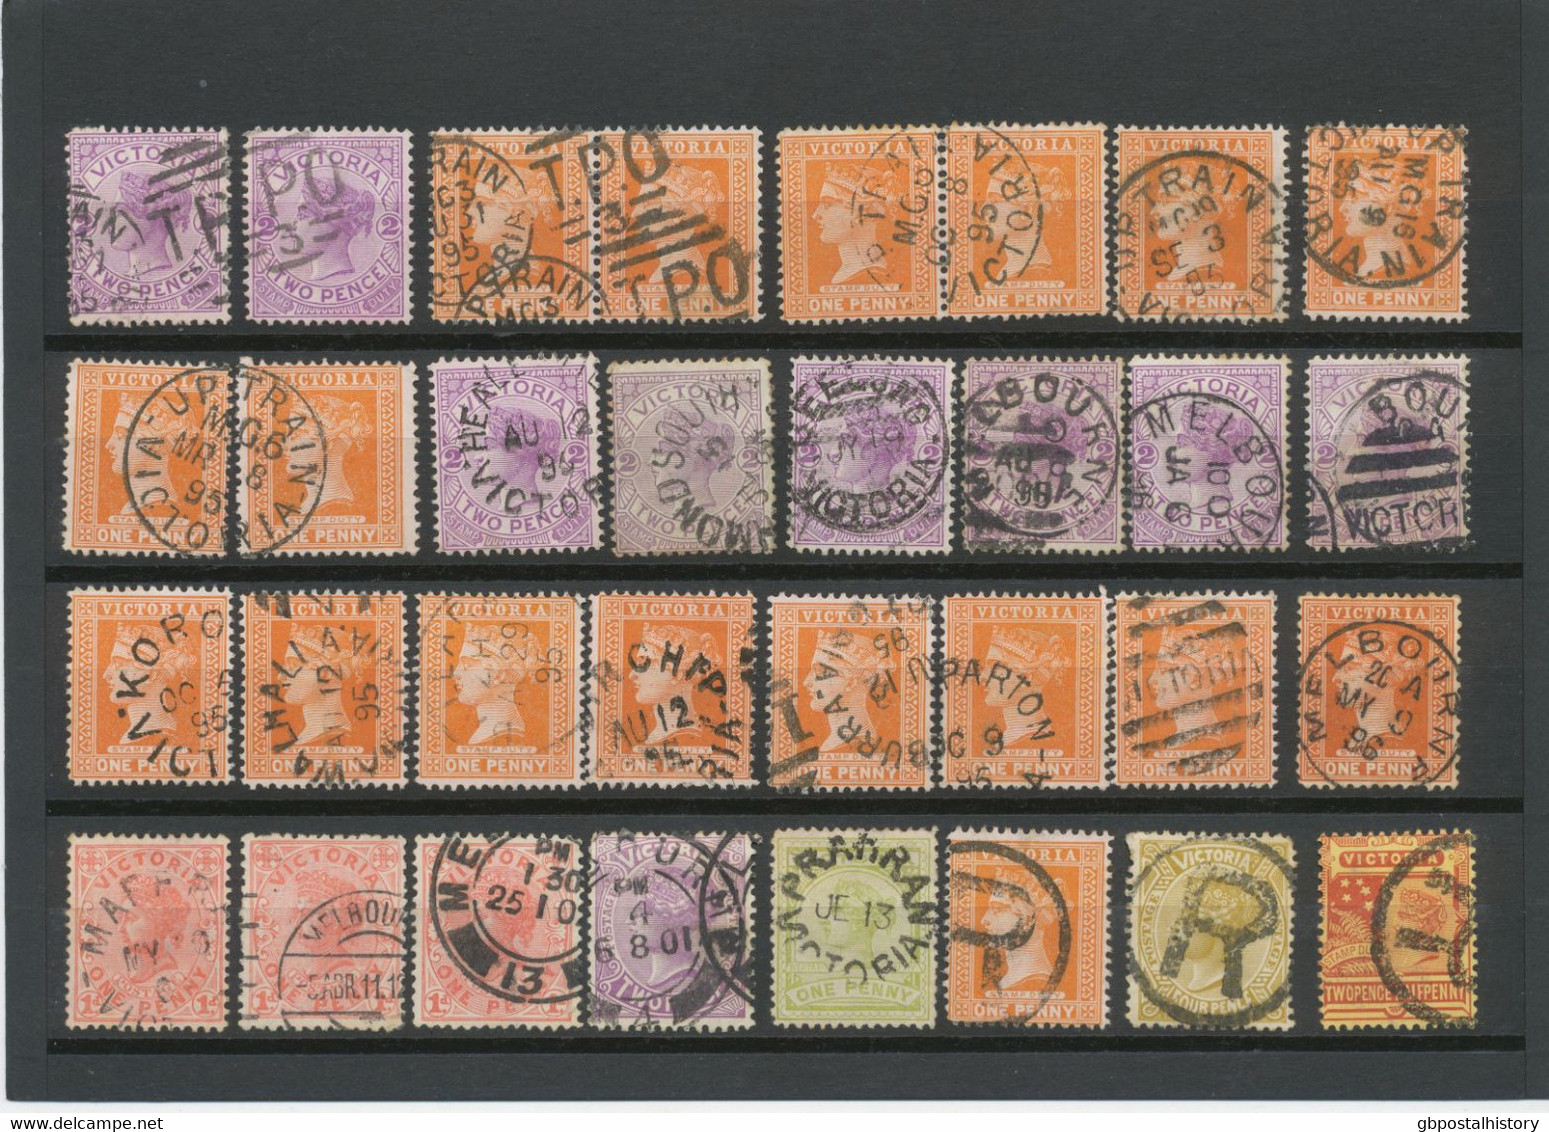 COLLECTION AUSTRALIA OF CLASSIC POSTMARKS (NUMERALS, DUPLEX, TPO (Railway), R (Registered) And Some Others) Ca. 1880/190 - Verzamelingen